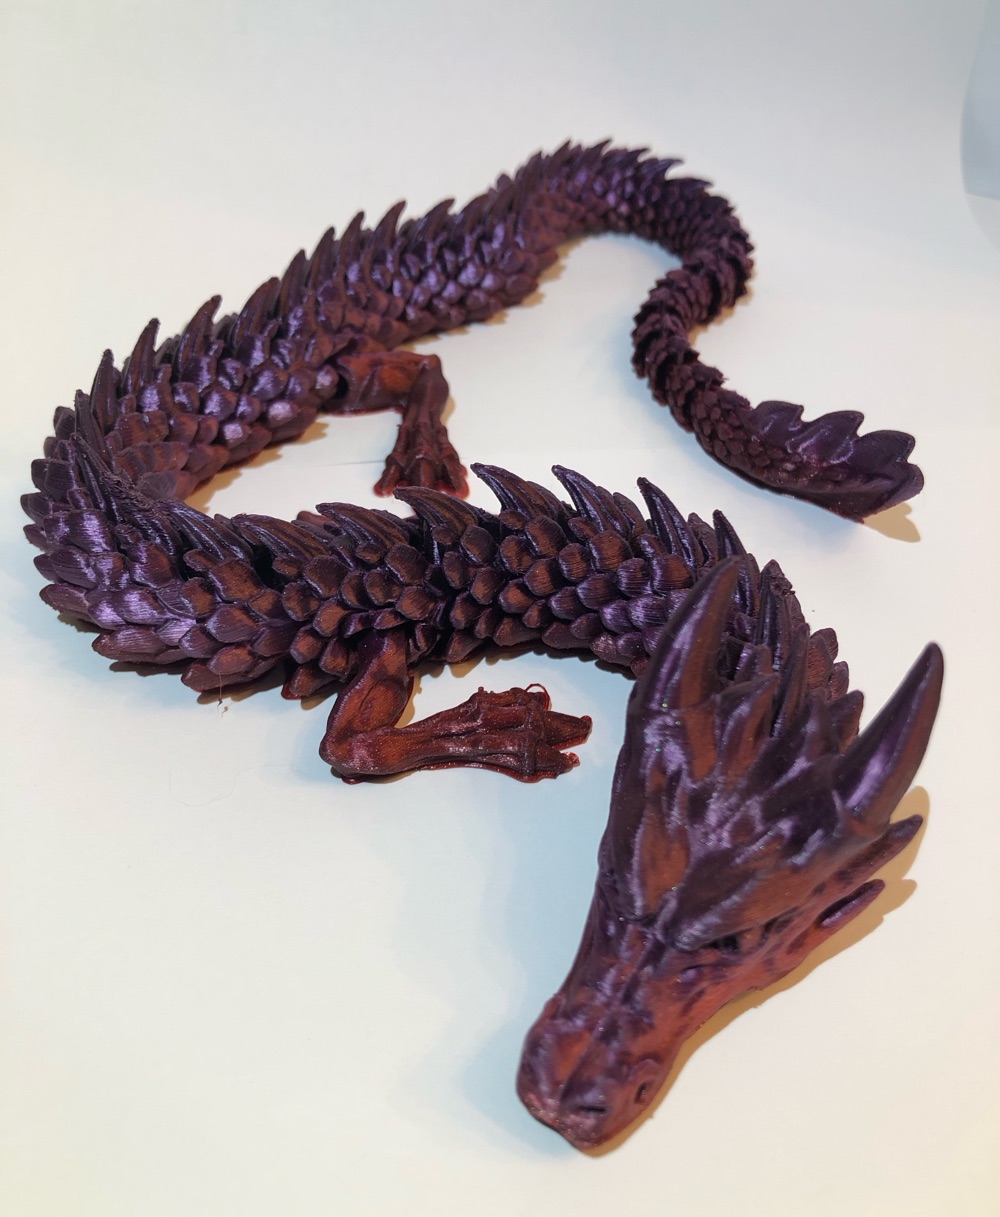 Meet Braq: The Amazing Fully Articulated 3D Printed Dragon